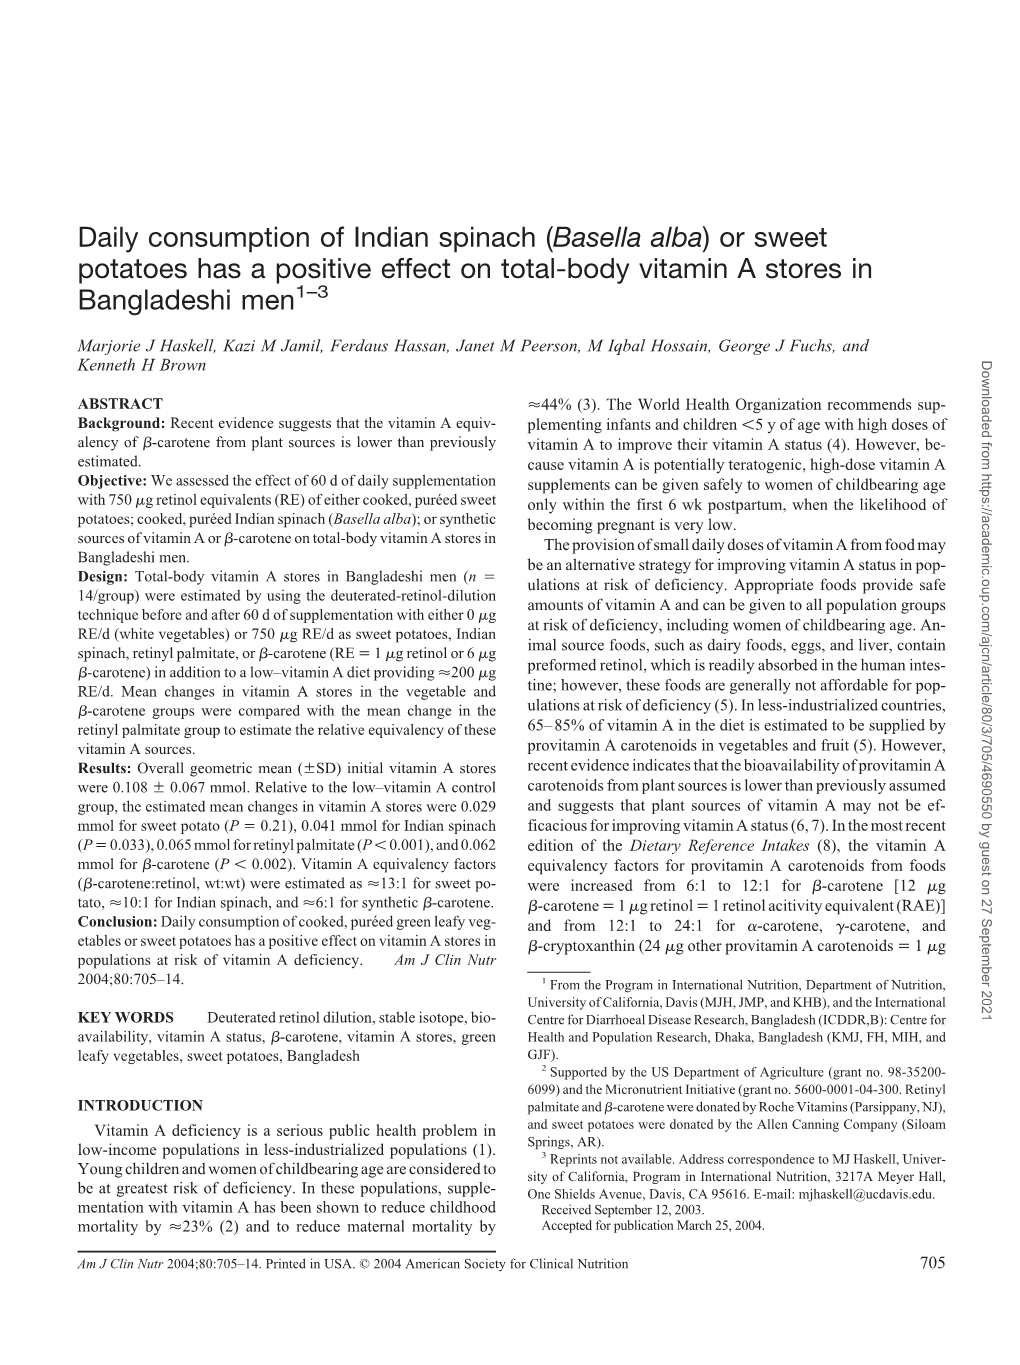 Daily Consumption of Indian Spinach (Basella Alba) Or Sweet Potatoes Has a Positive Effect on Total-Body Vitamin a Stores in Bangladeshi Men1–3